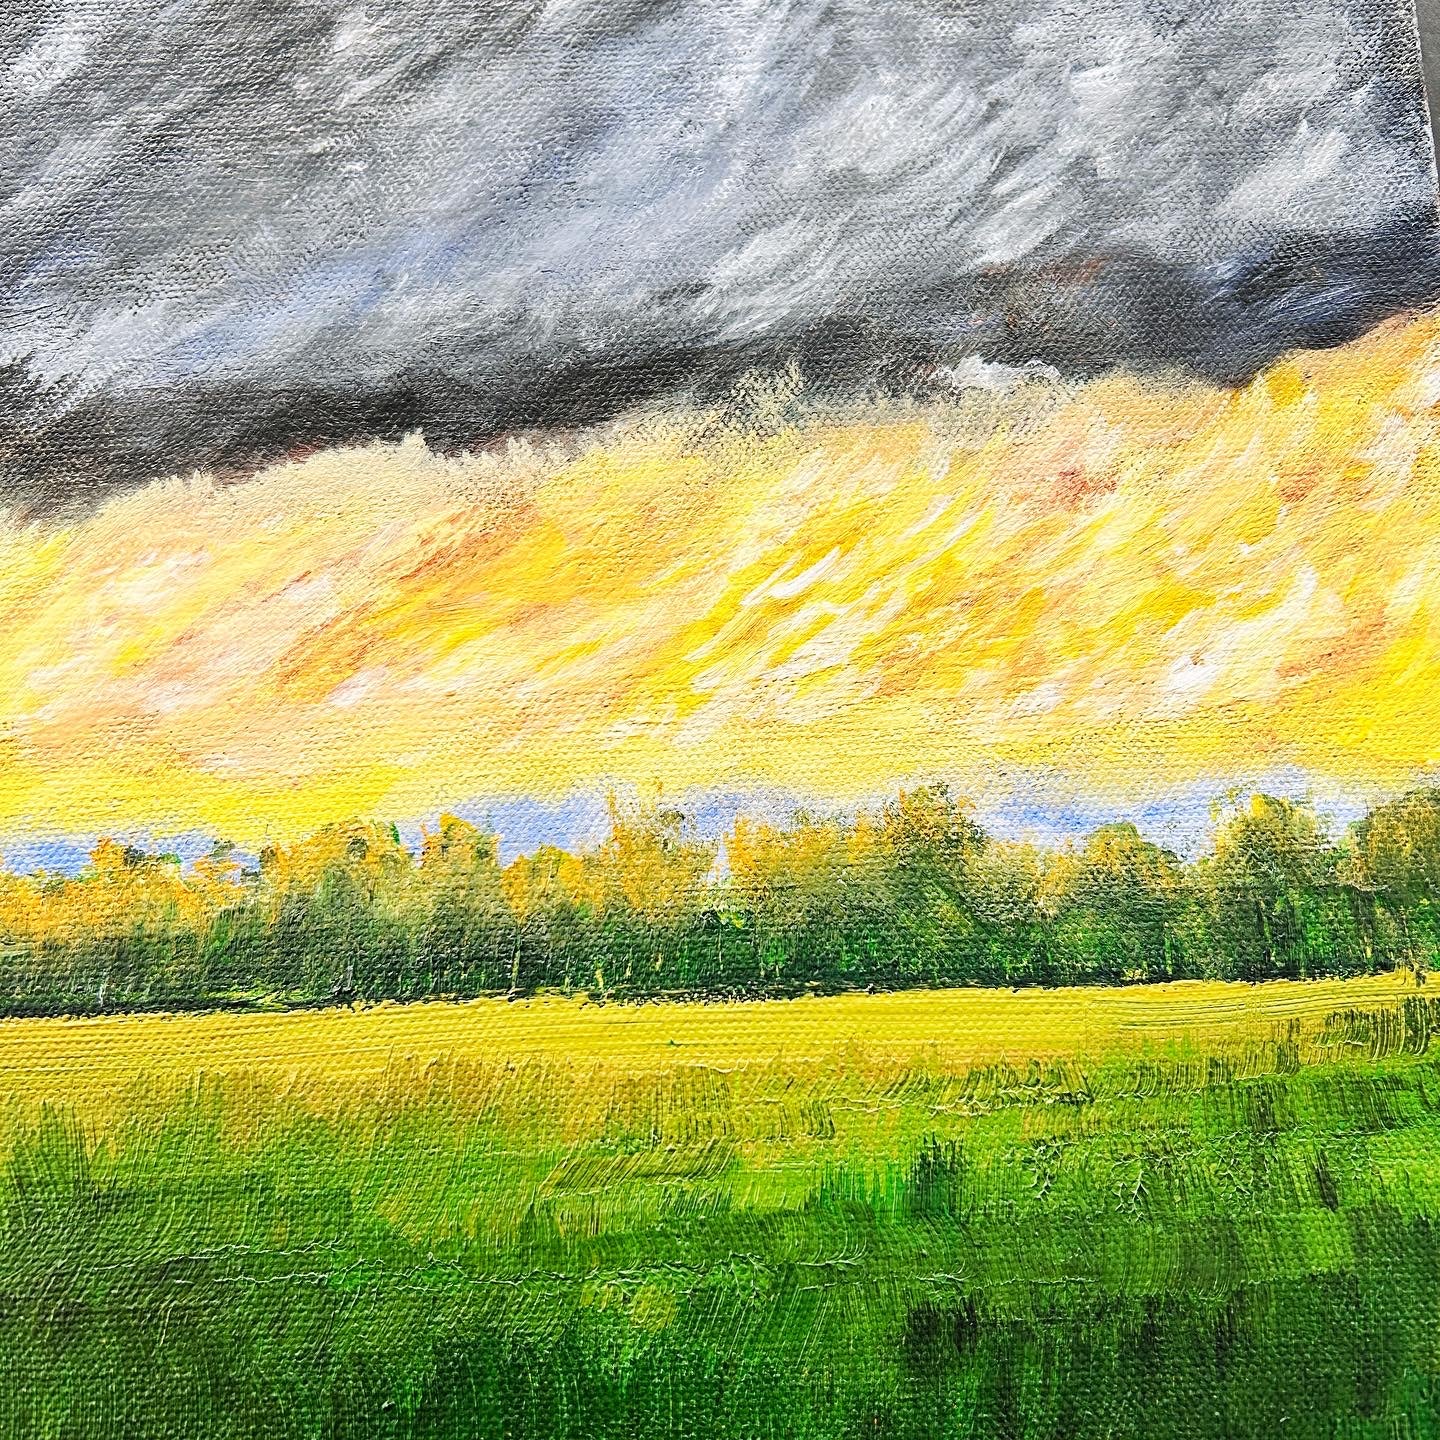 Gold is in the air, original painting